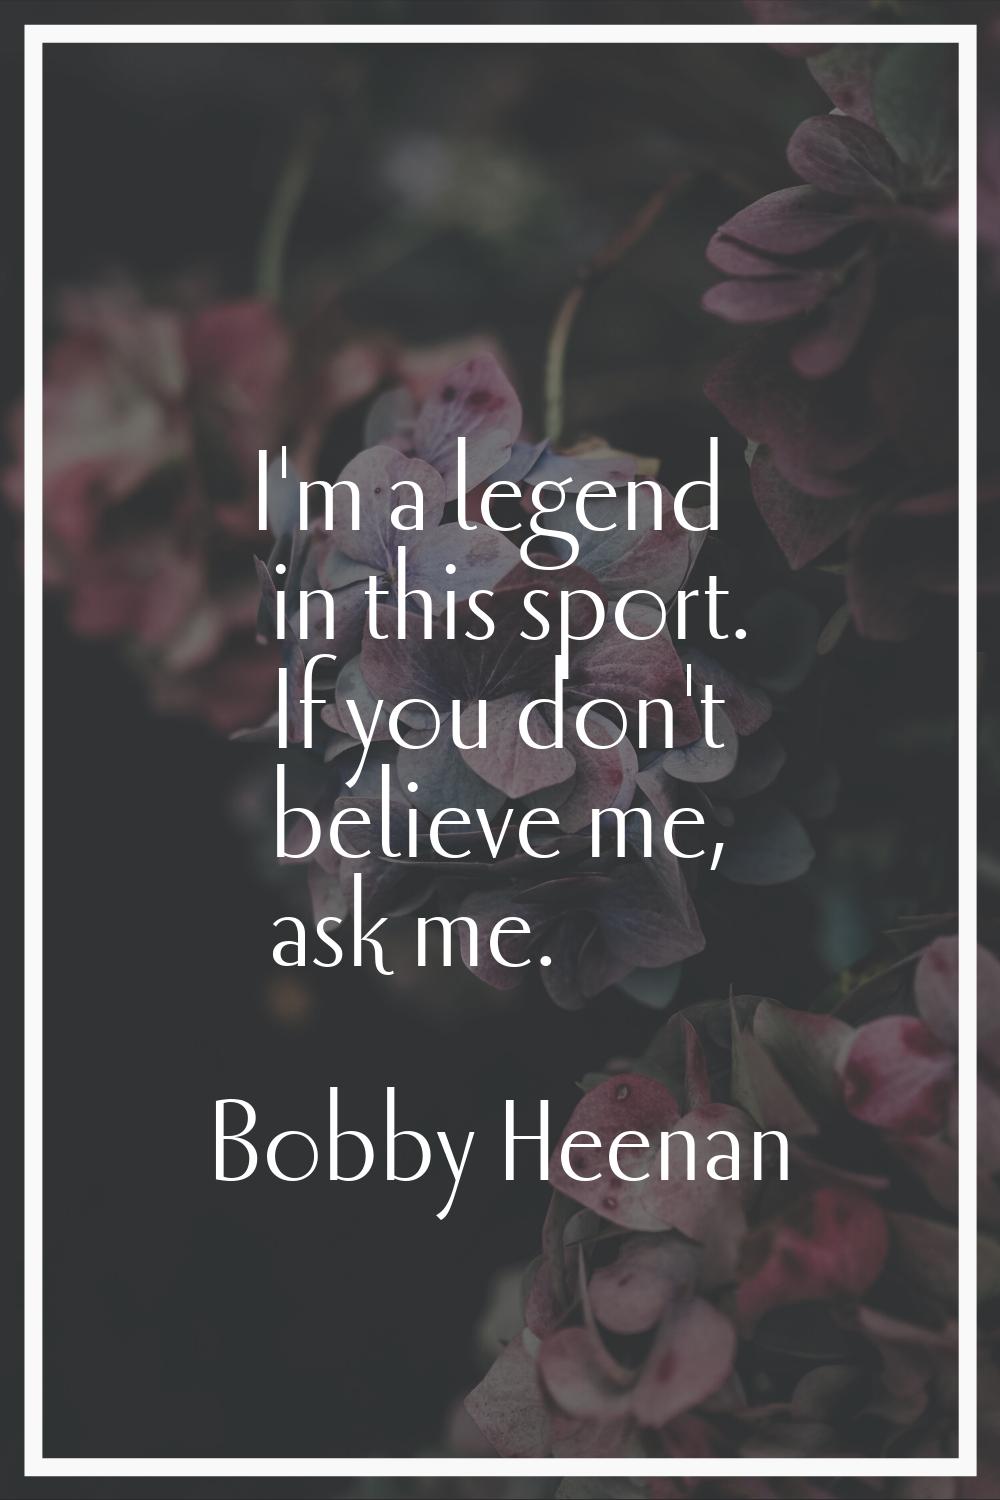 I'm a legend in this sport. If you don't believe me, ask me.